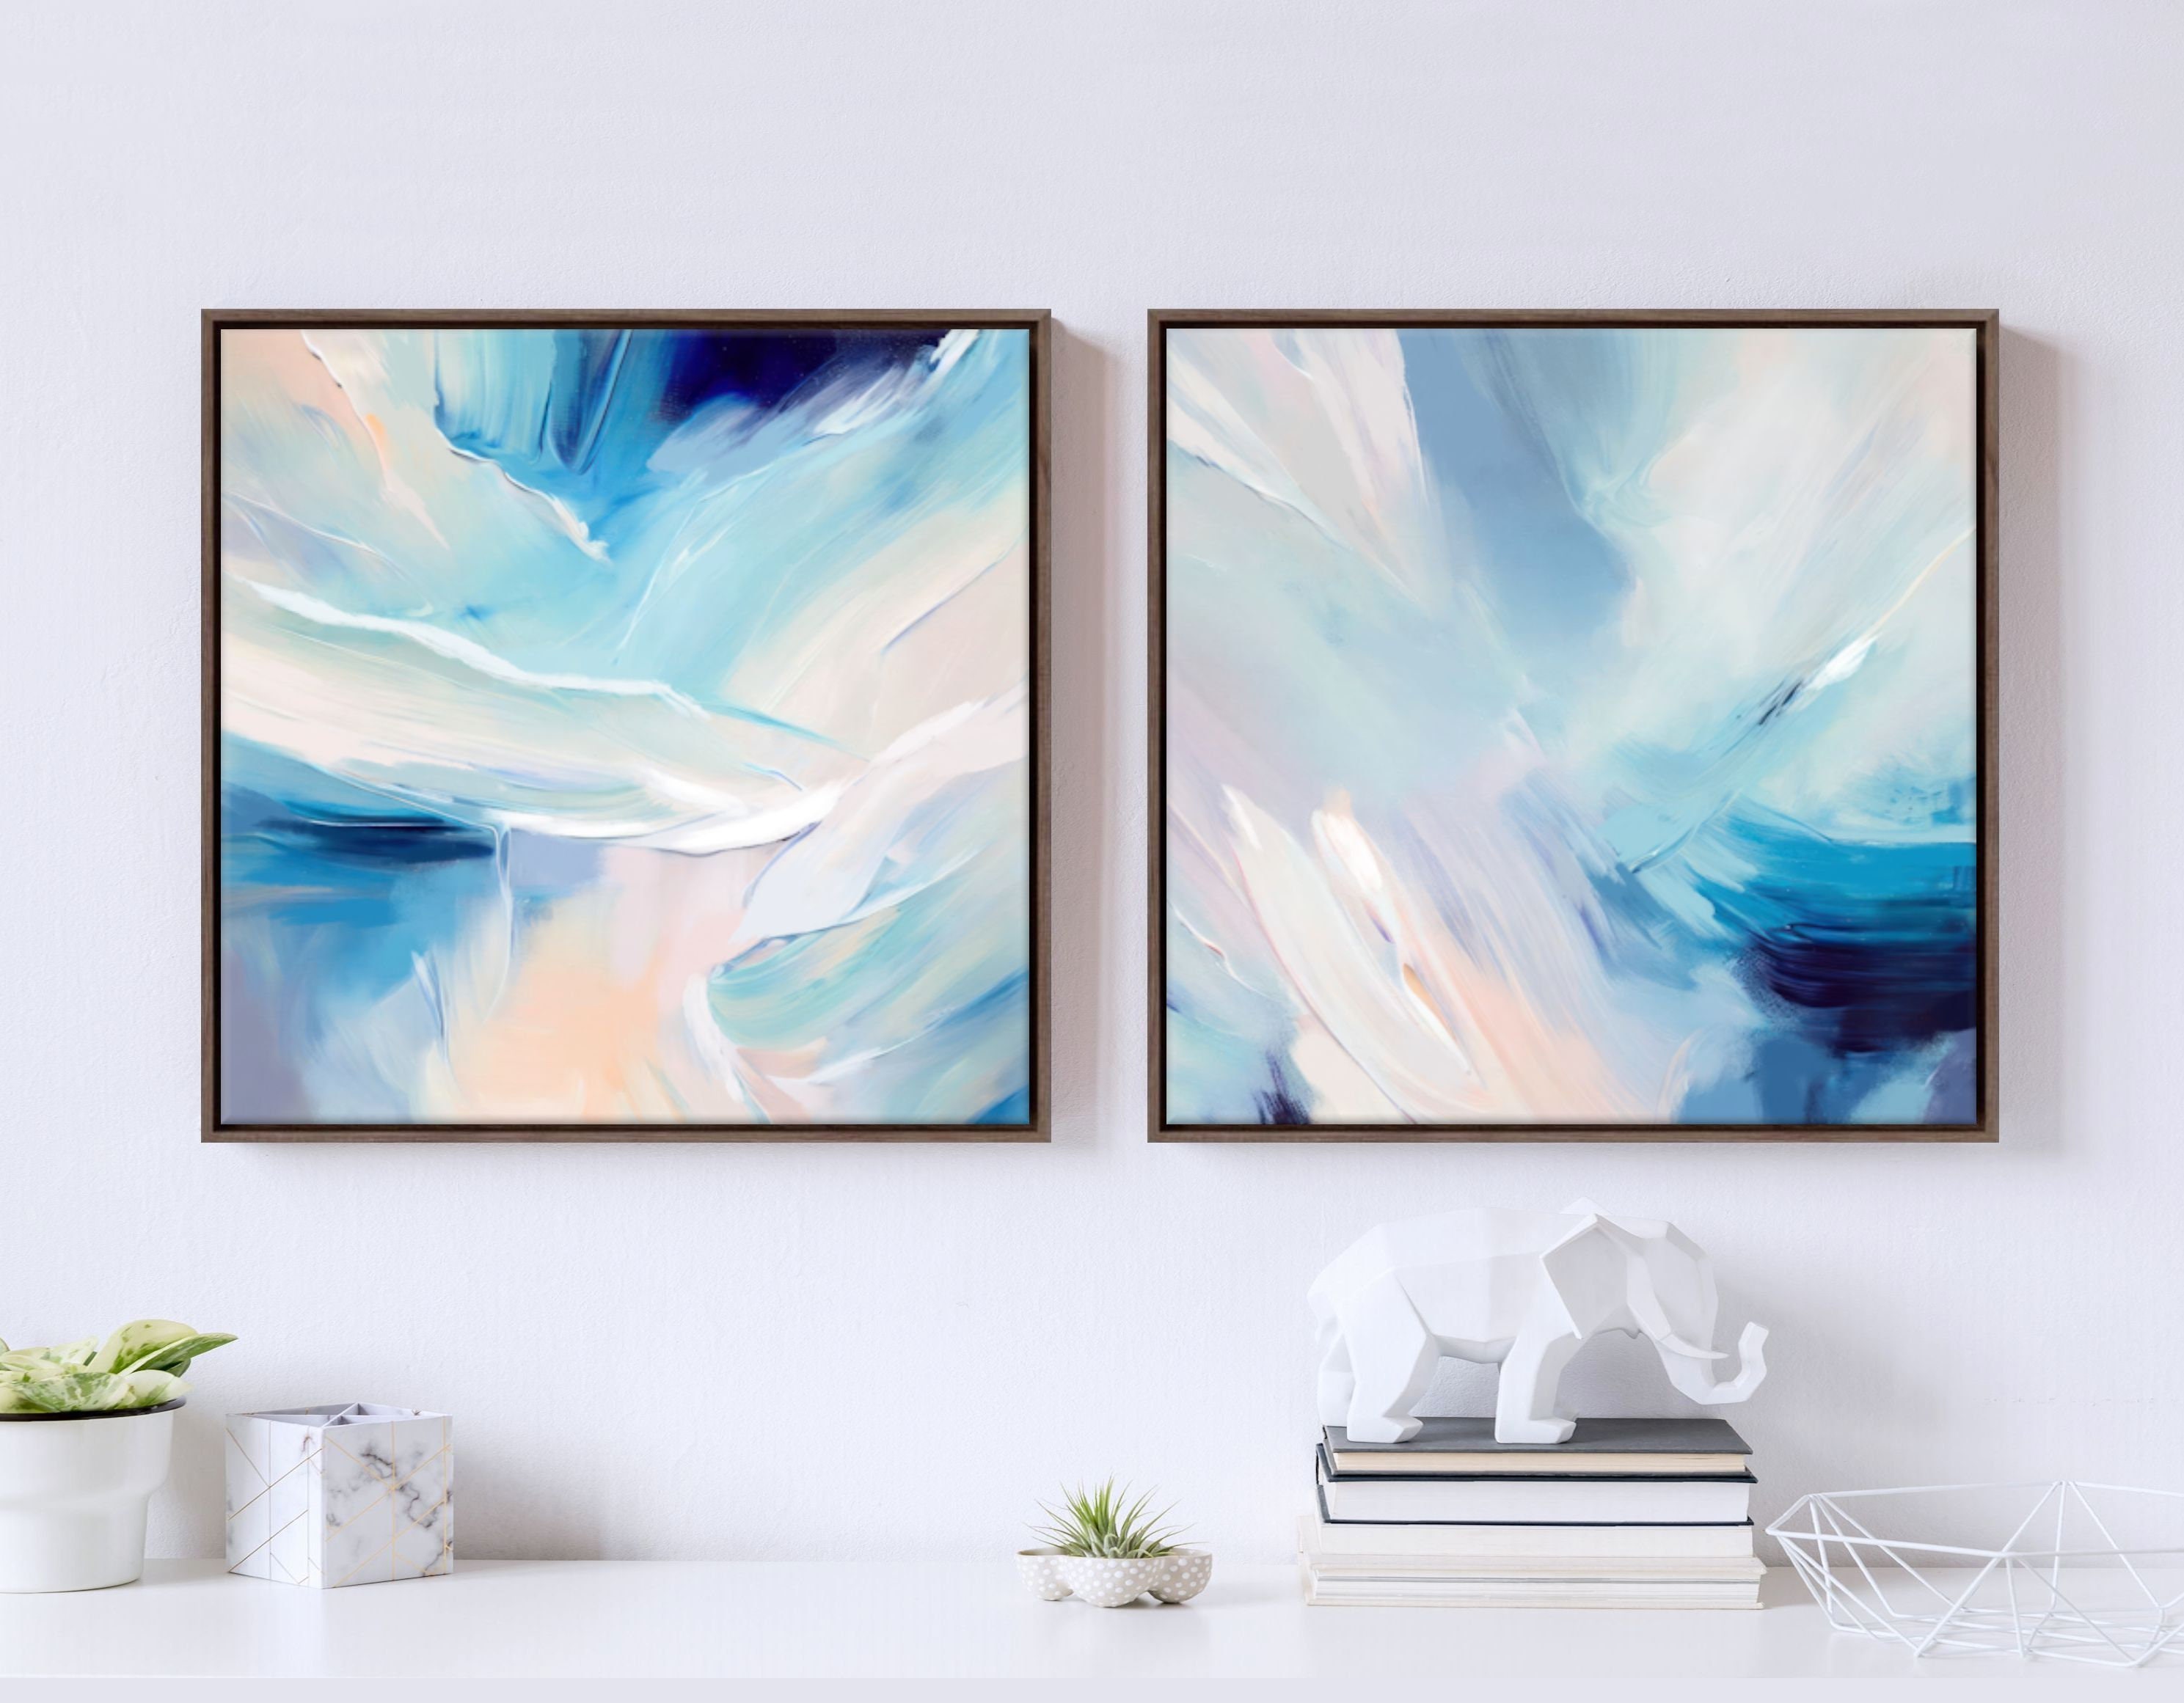 Abstract Wall Art Canvas Paintings Blue Yellow Fantasy Modern Large Framed  Artwork Decor for Living Room Bedroom Office Painting Home Decor 30x60